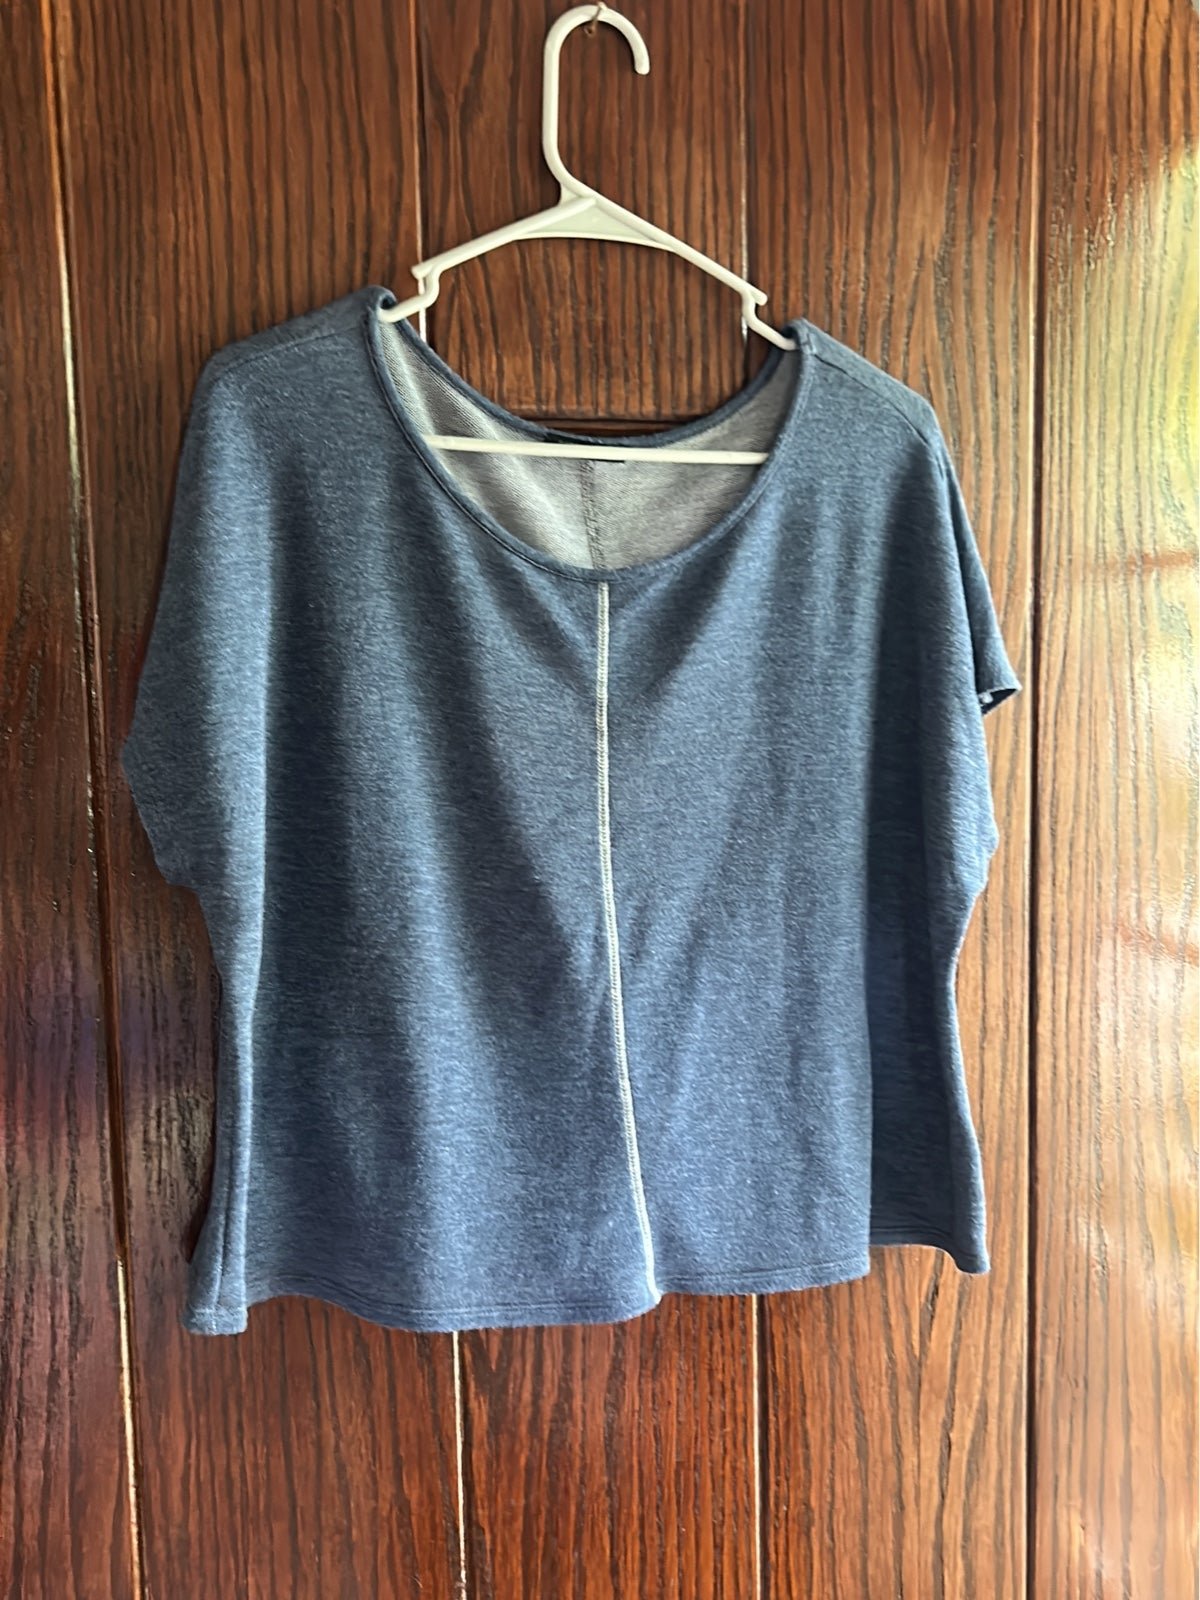 Buy Top small blue crop sleeveless FjlYu5AwA US Outlet